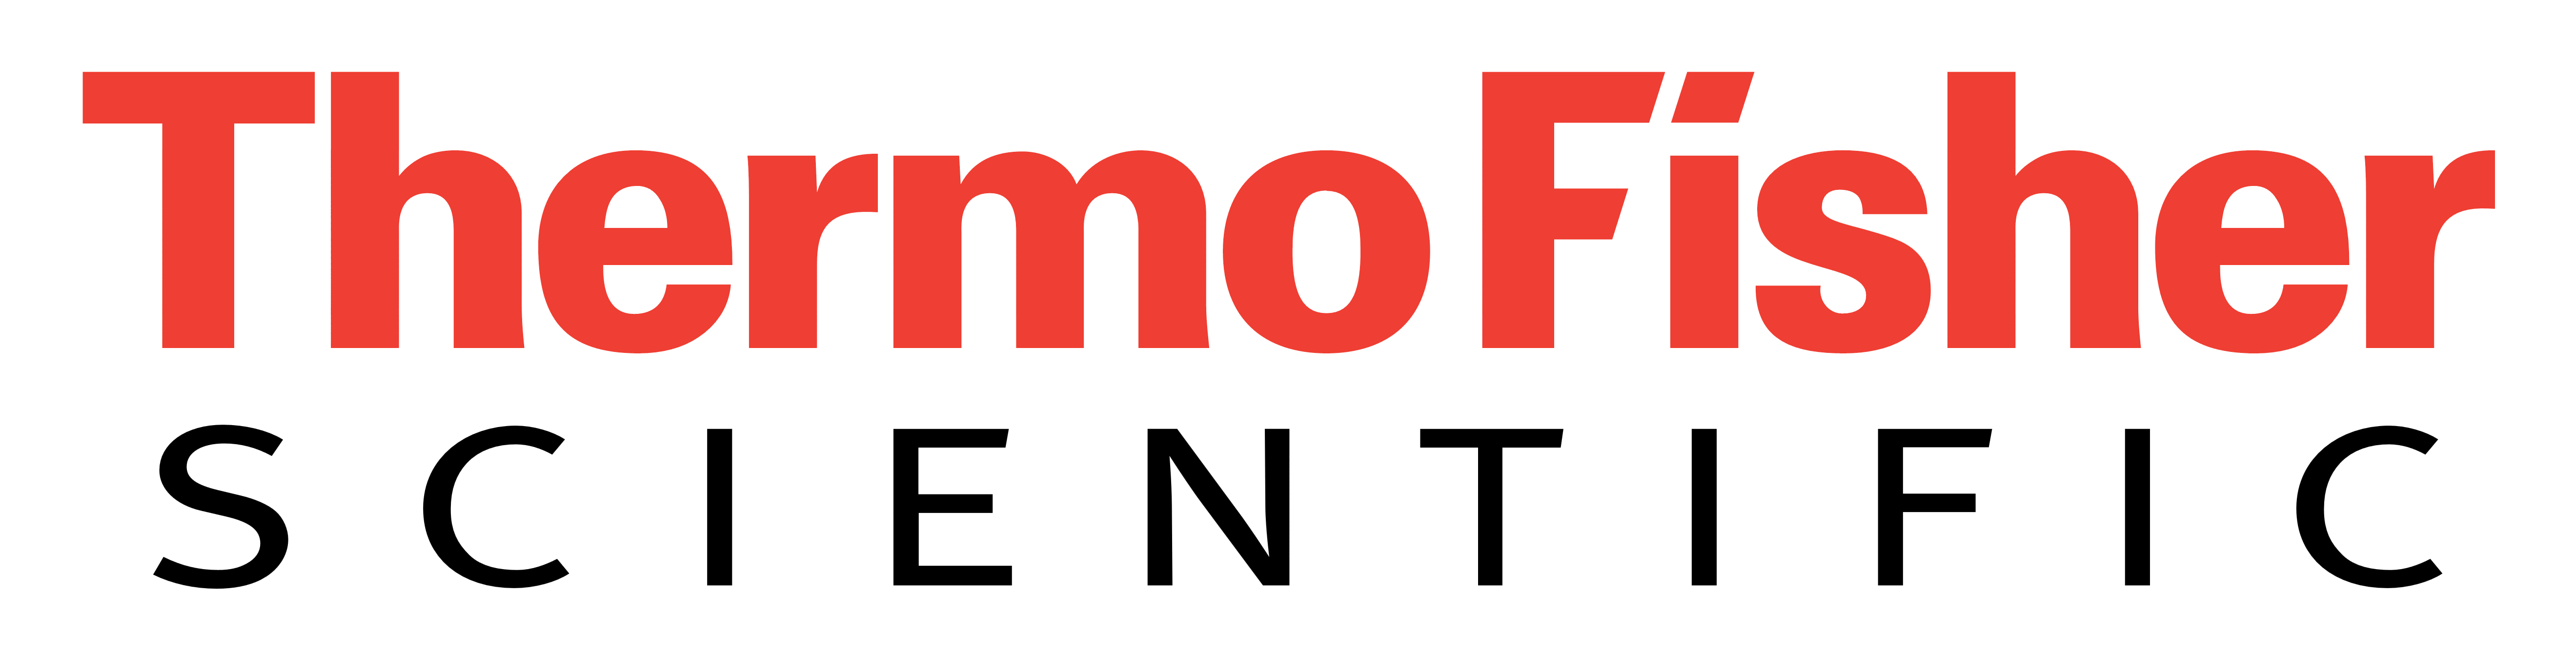 thermo fisher scientfic logo